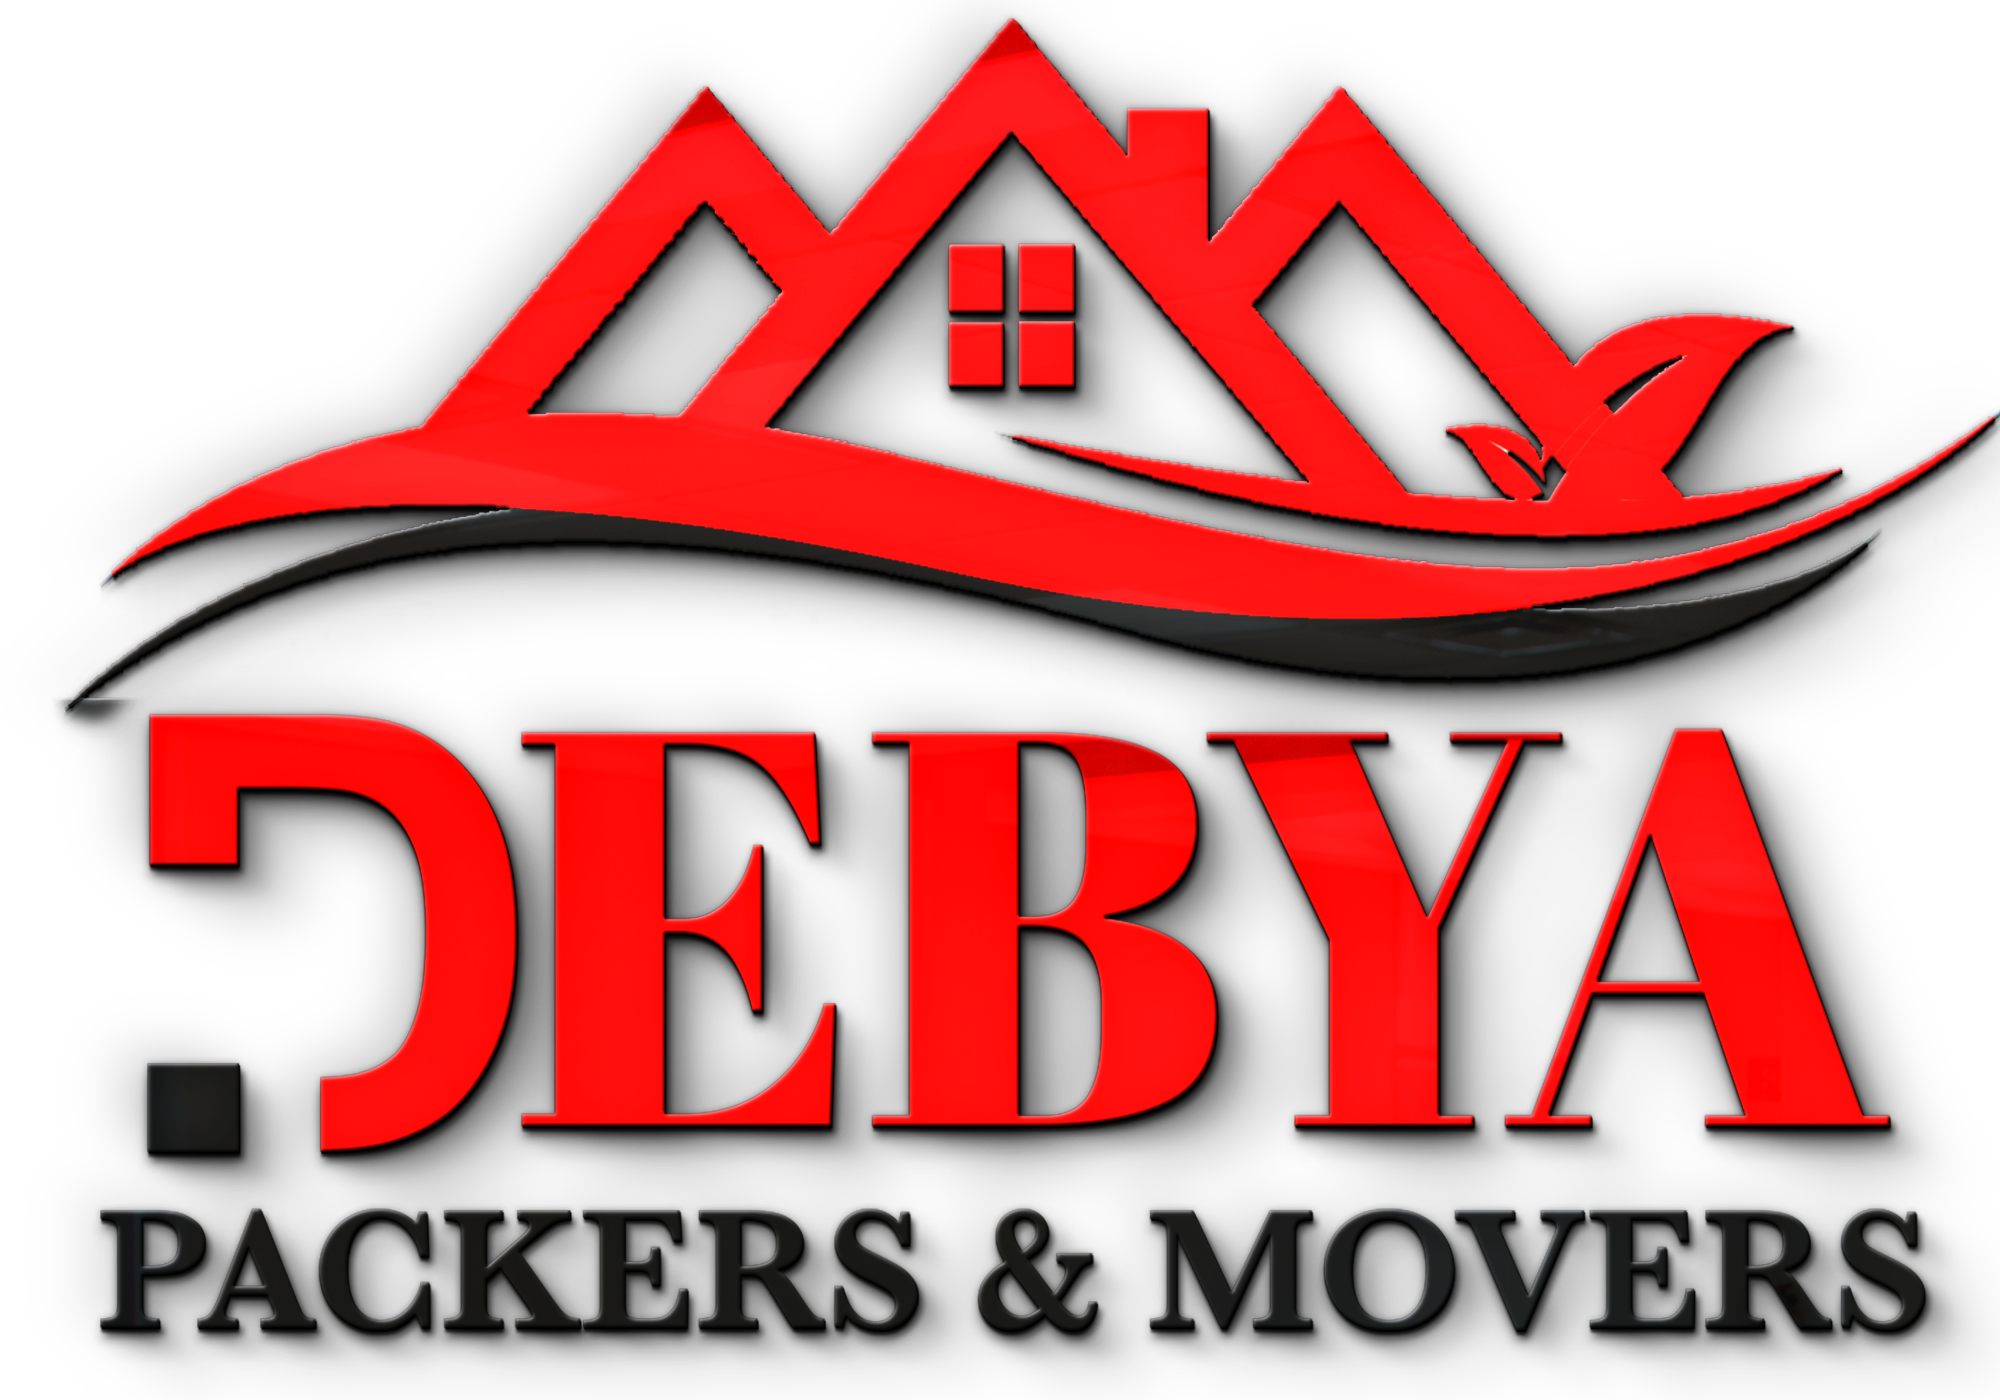 Debya Packers and Movers